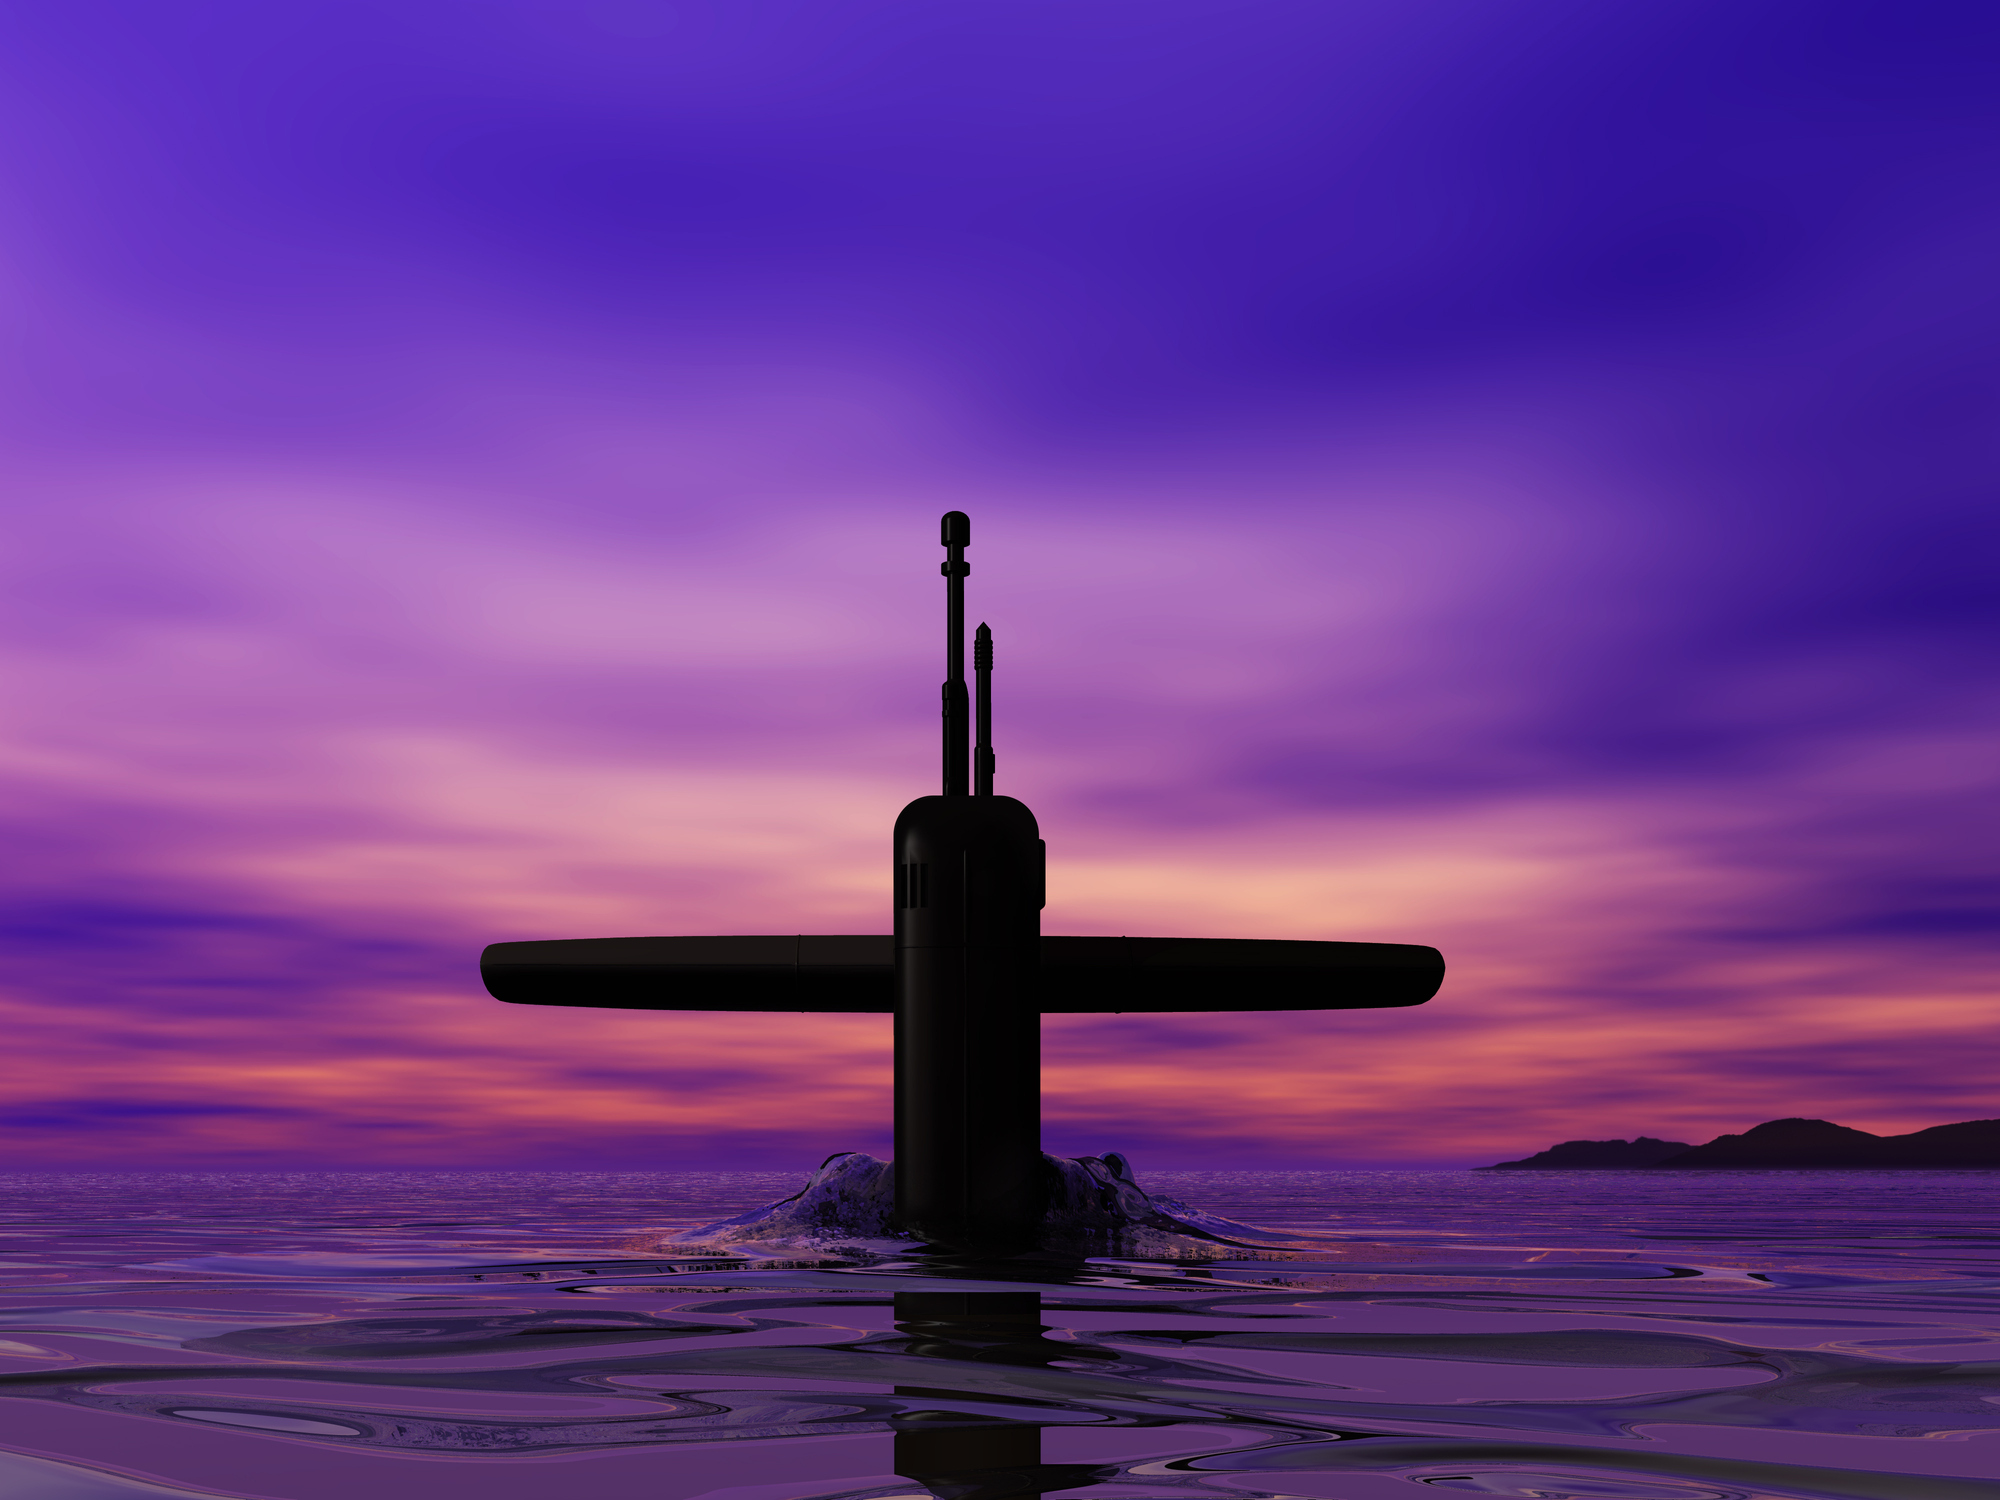 Rendering of a submarine surfacing at the sea